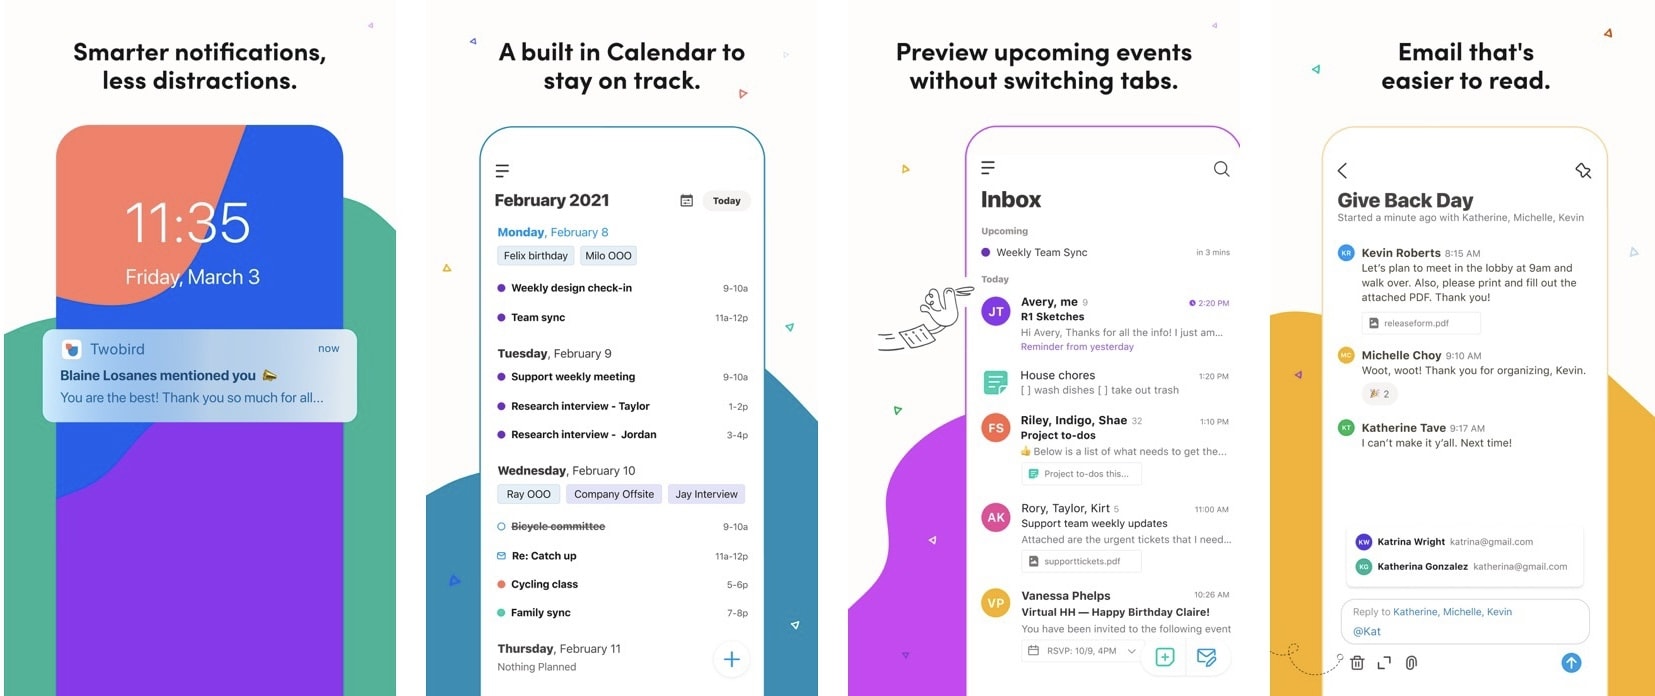 Twobird helps simplify email and note taking in a unified experience